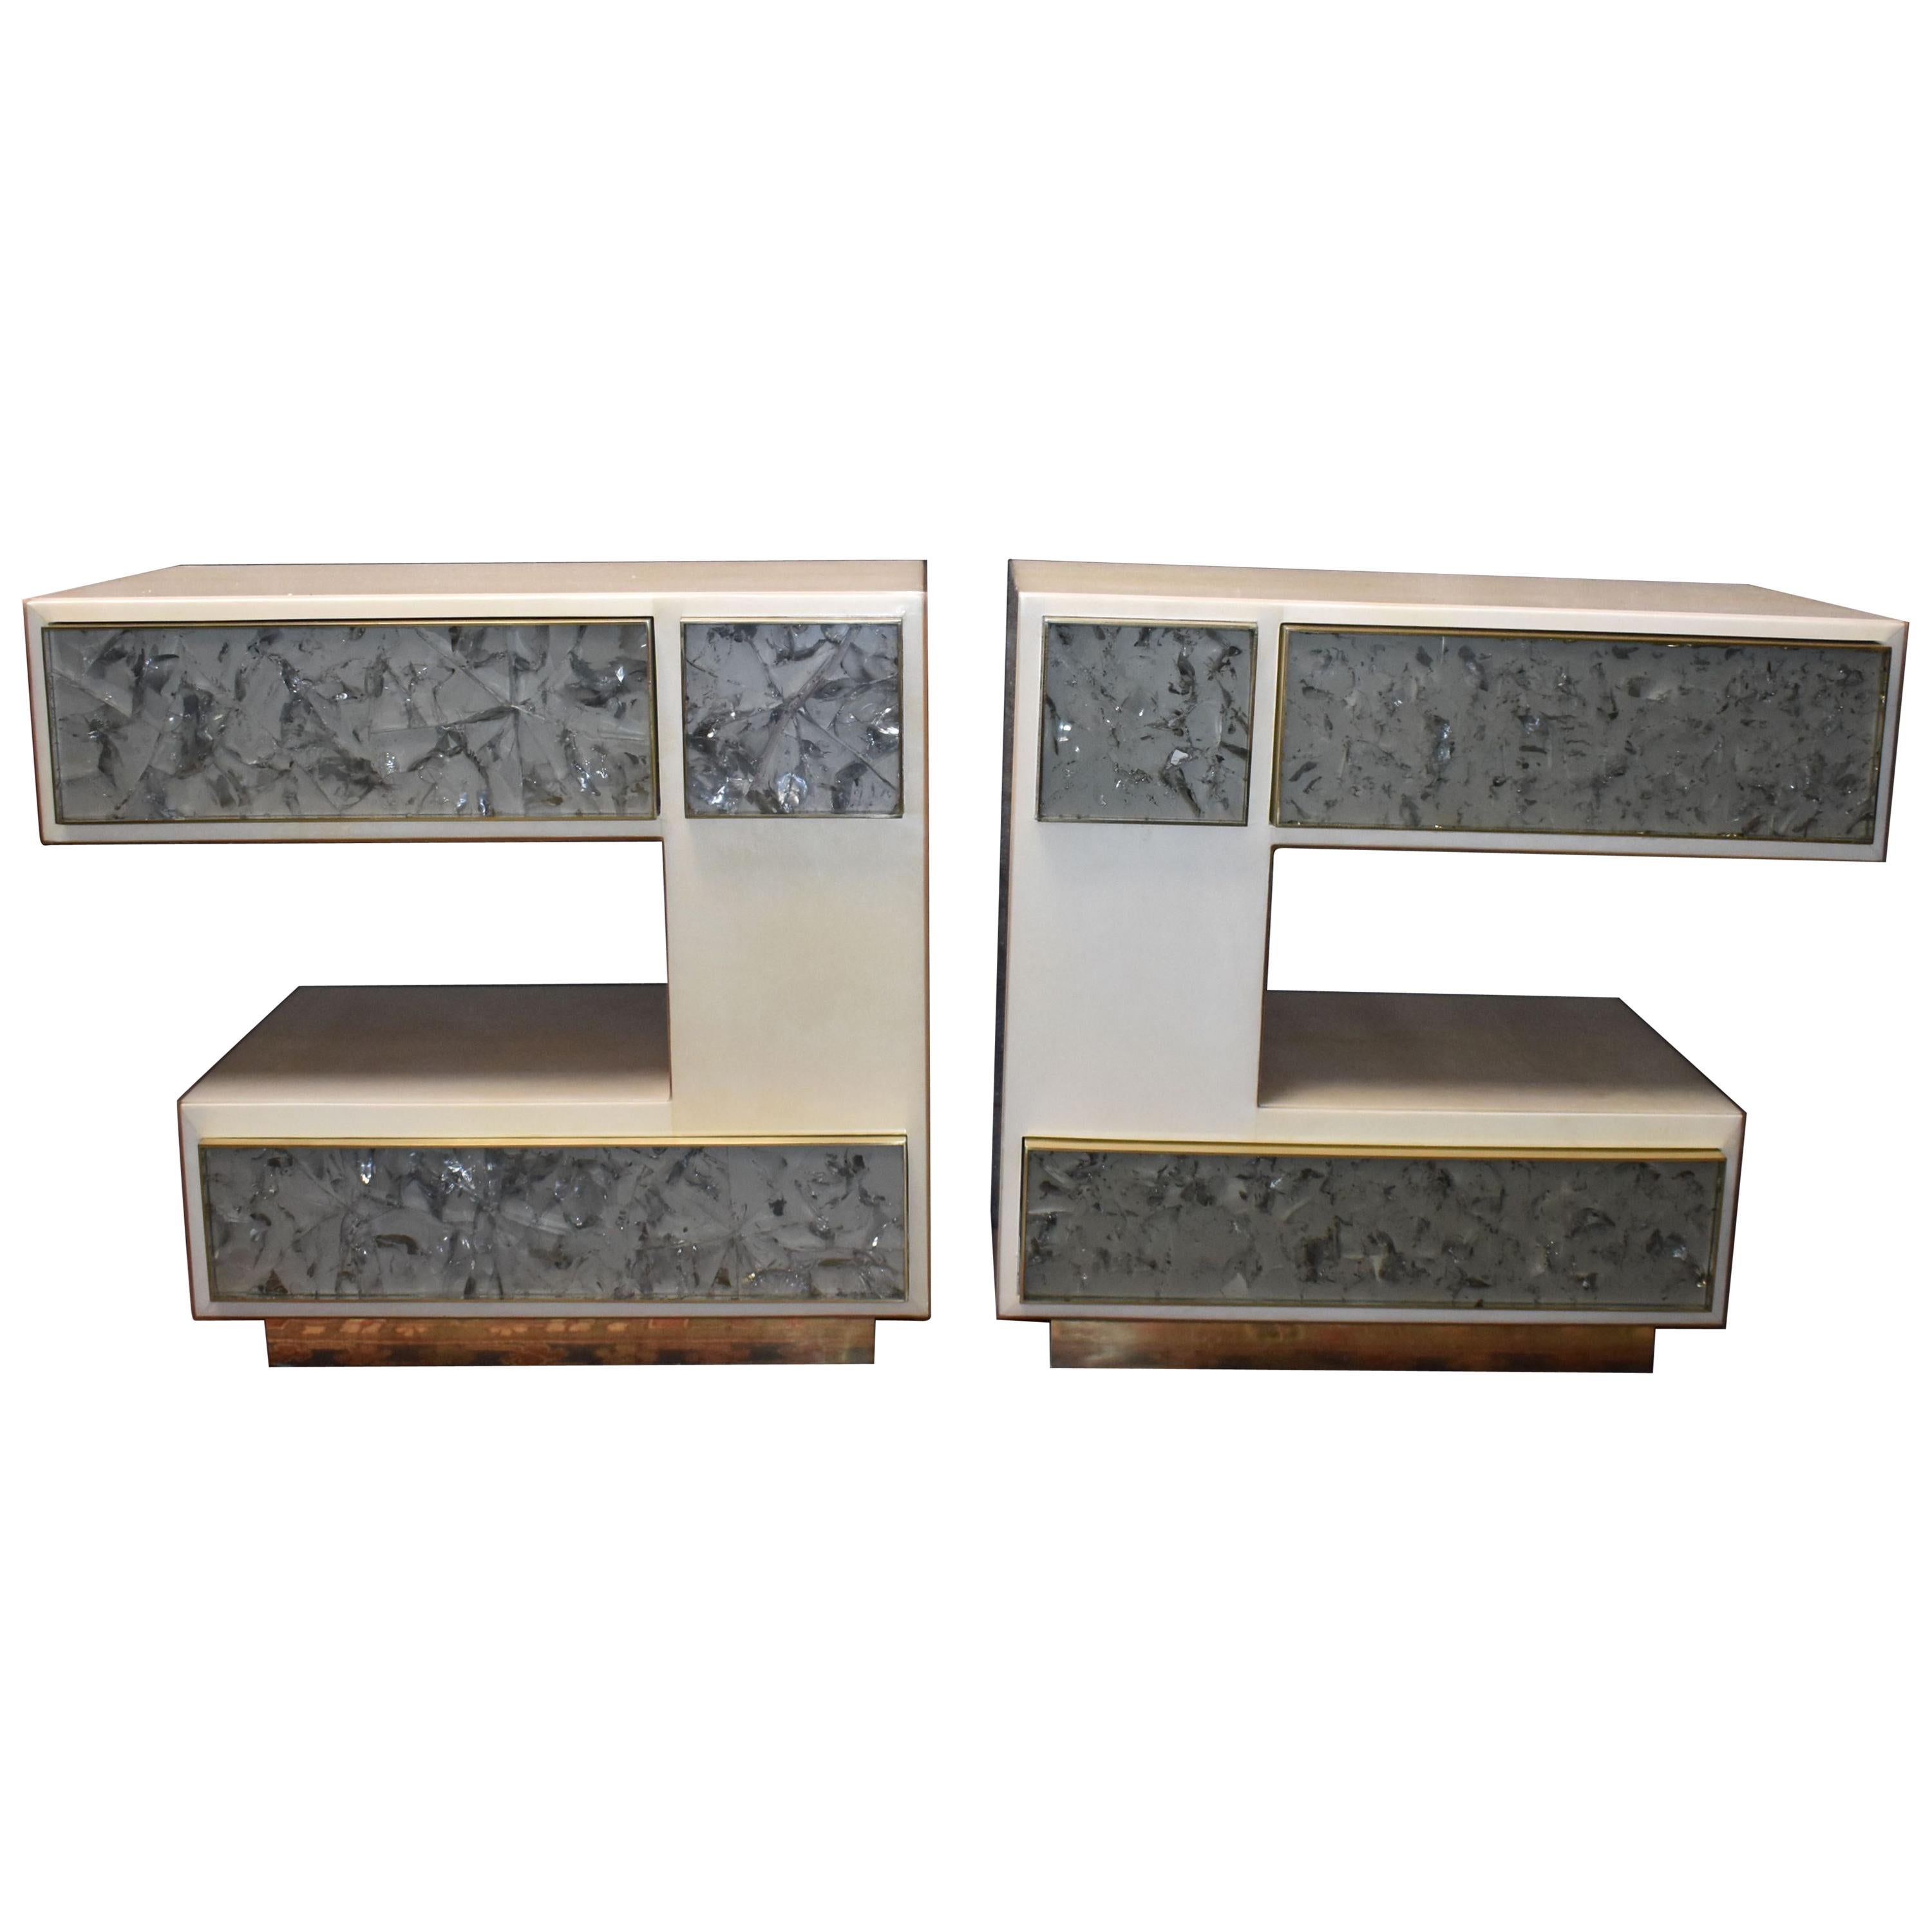 Pair of Artistic Parchment and Cracked Resin Side Tables or Nightstands